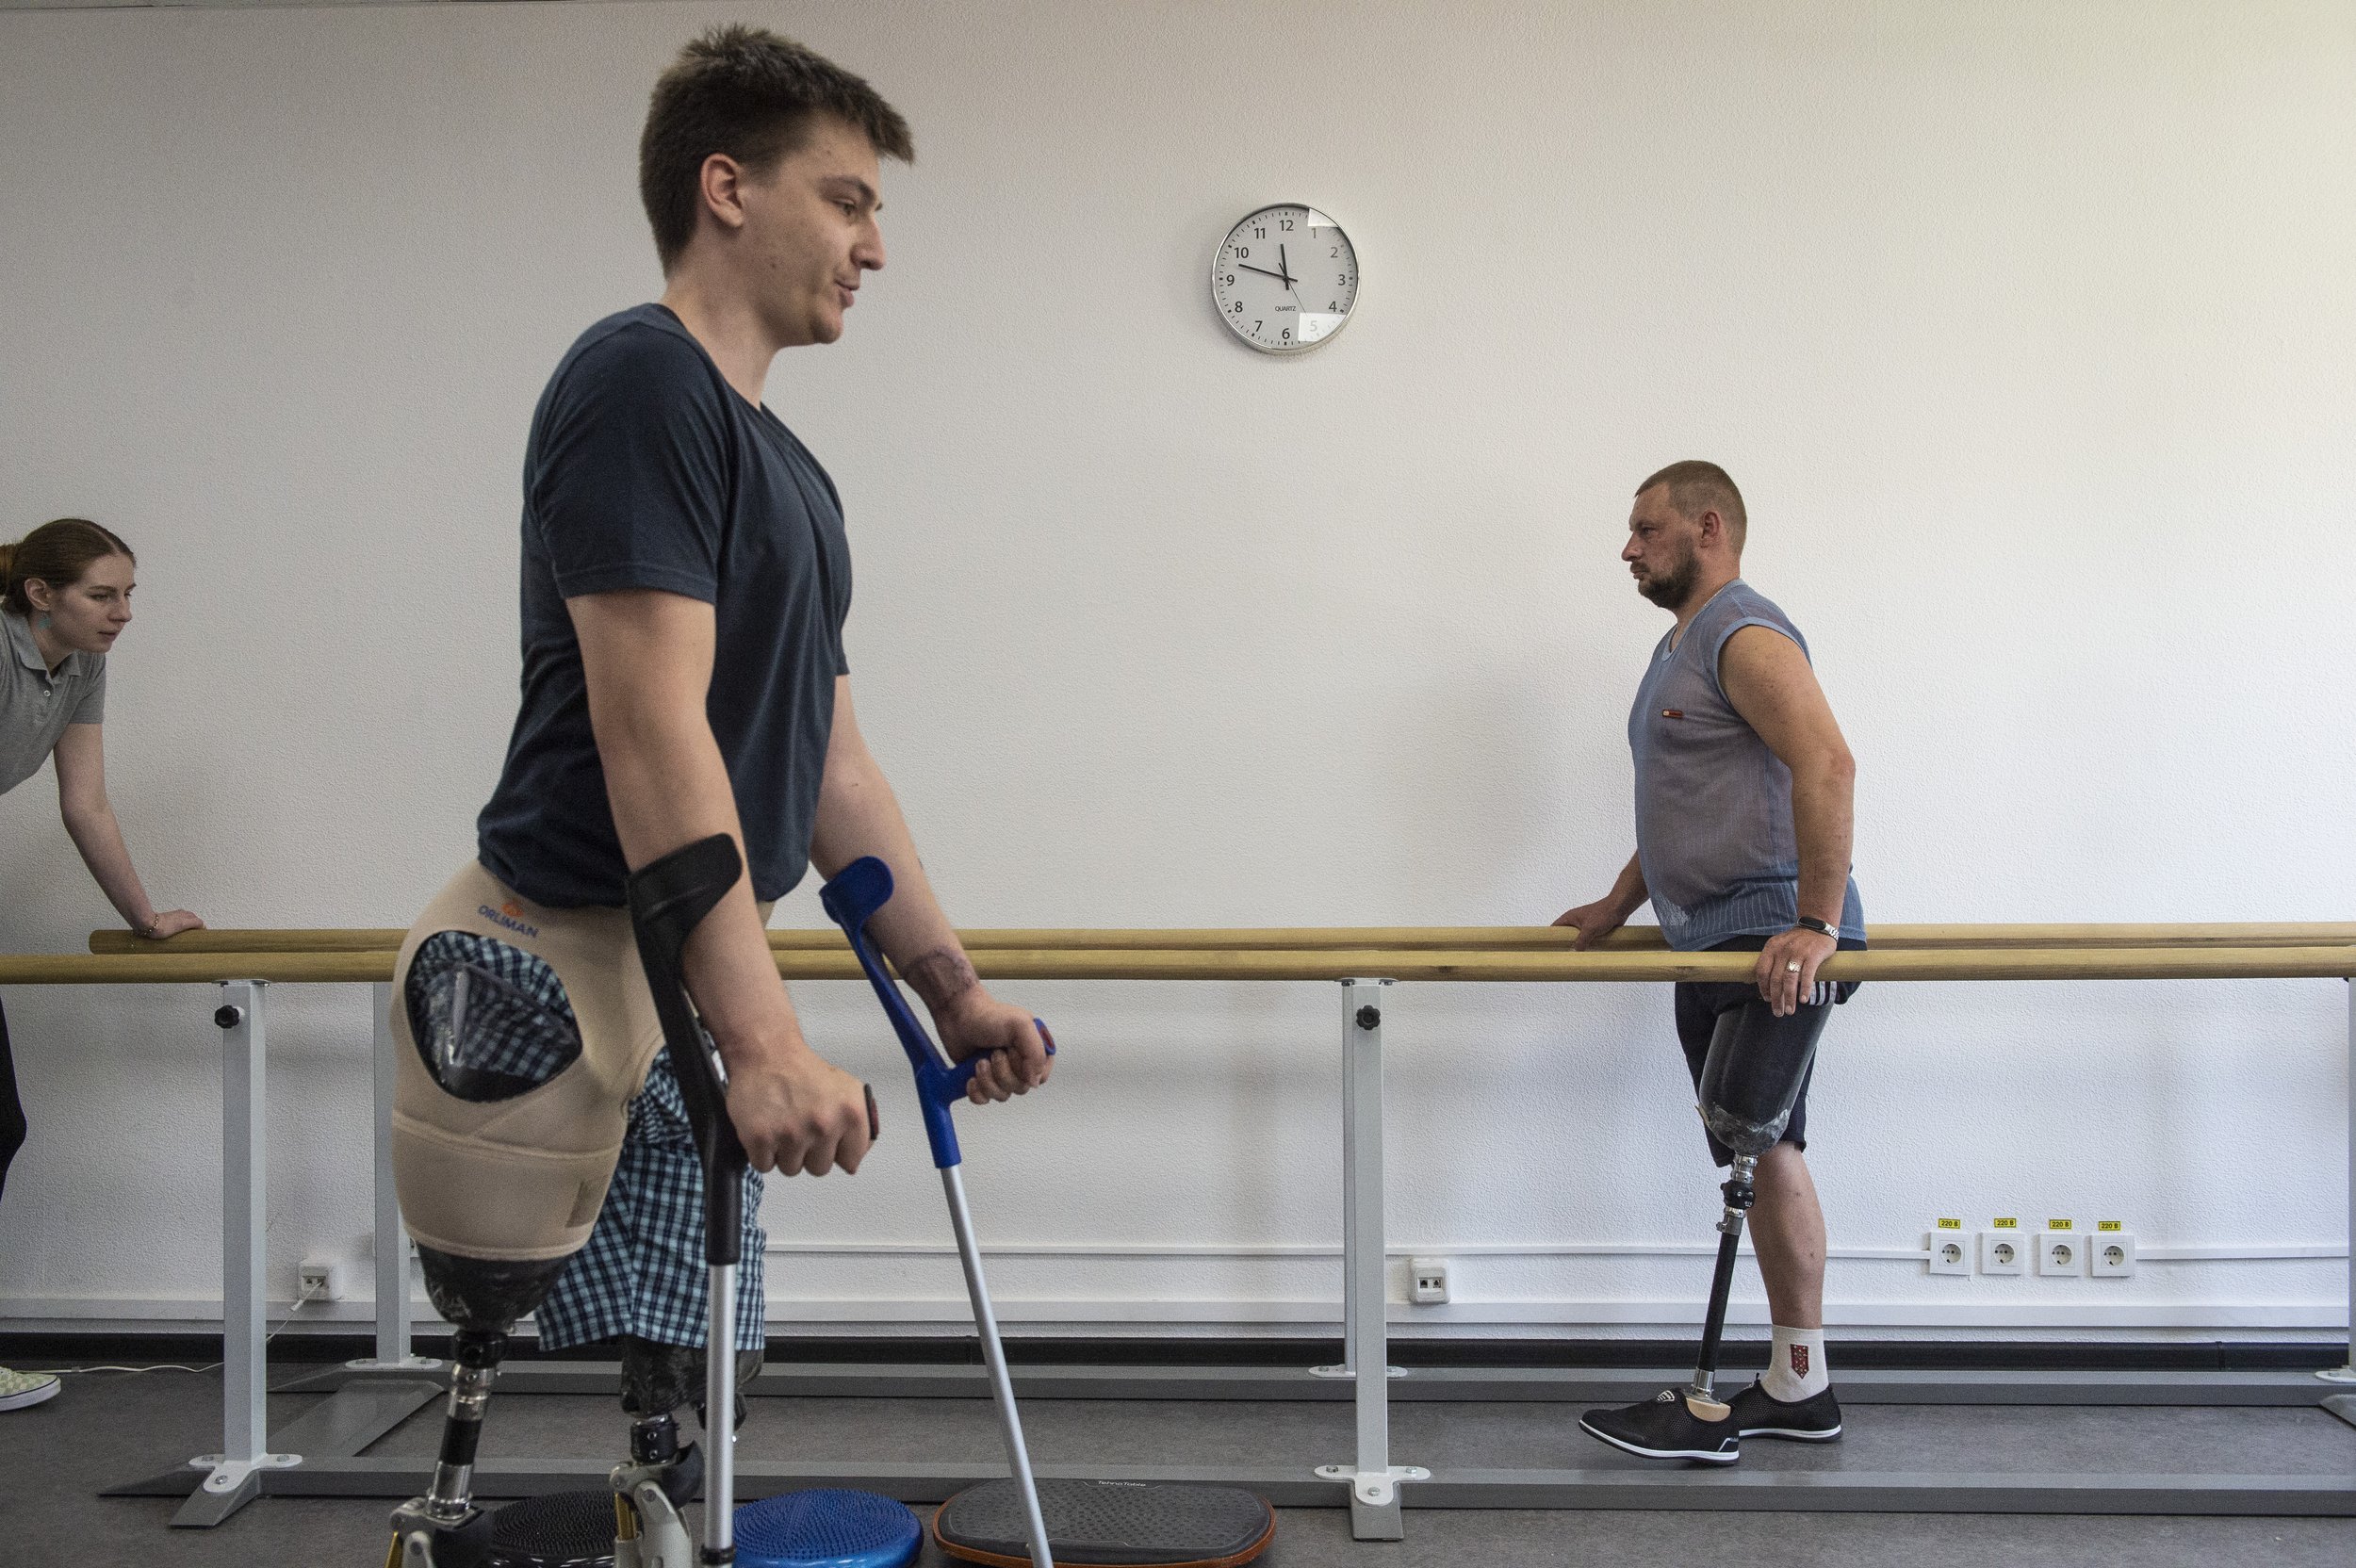  Ukrainian servicemen learn to walk again with the use of prosthetic limbs at the Without Limits Clinic in Kyiv, Ukraine on June 20, 2023. The clinic one of many that relies on donations and makes its own prosthetic limbs and teaches patients how to 